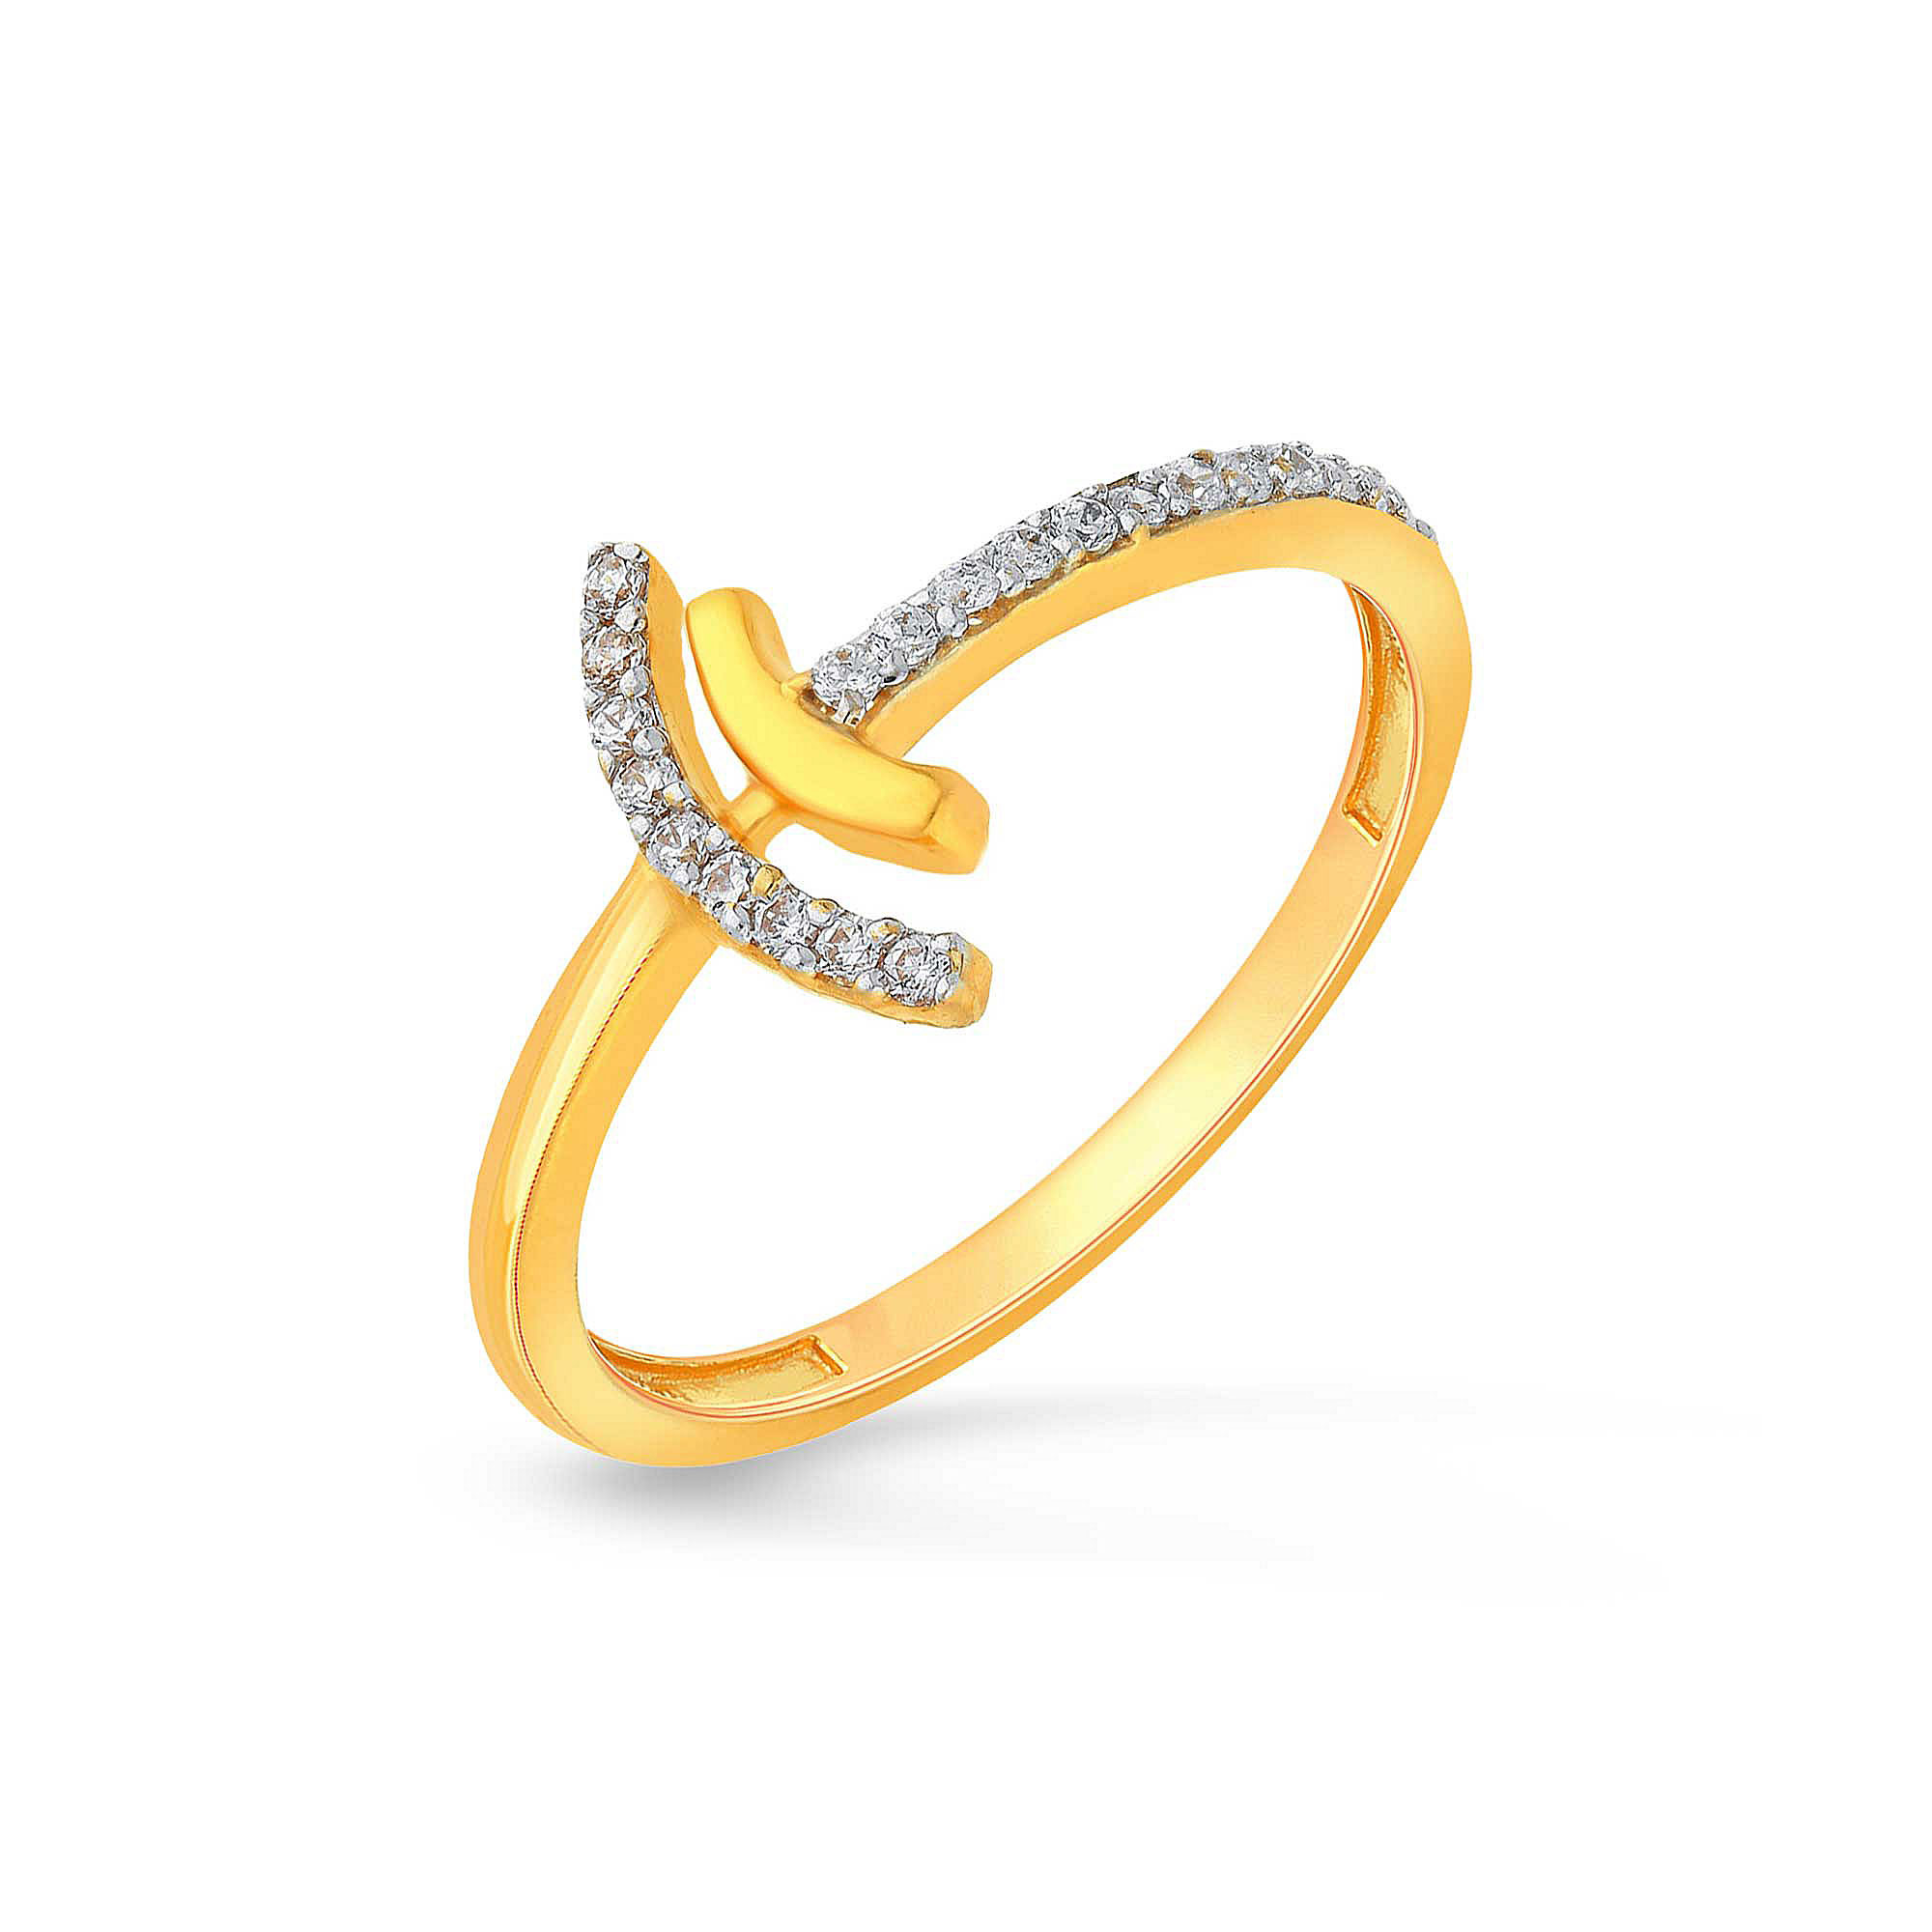 Buy MALABAR GOLD AND DIAMONDS Womens Malabar Gold Ring - Size 11 | Shoppers  Stop